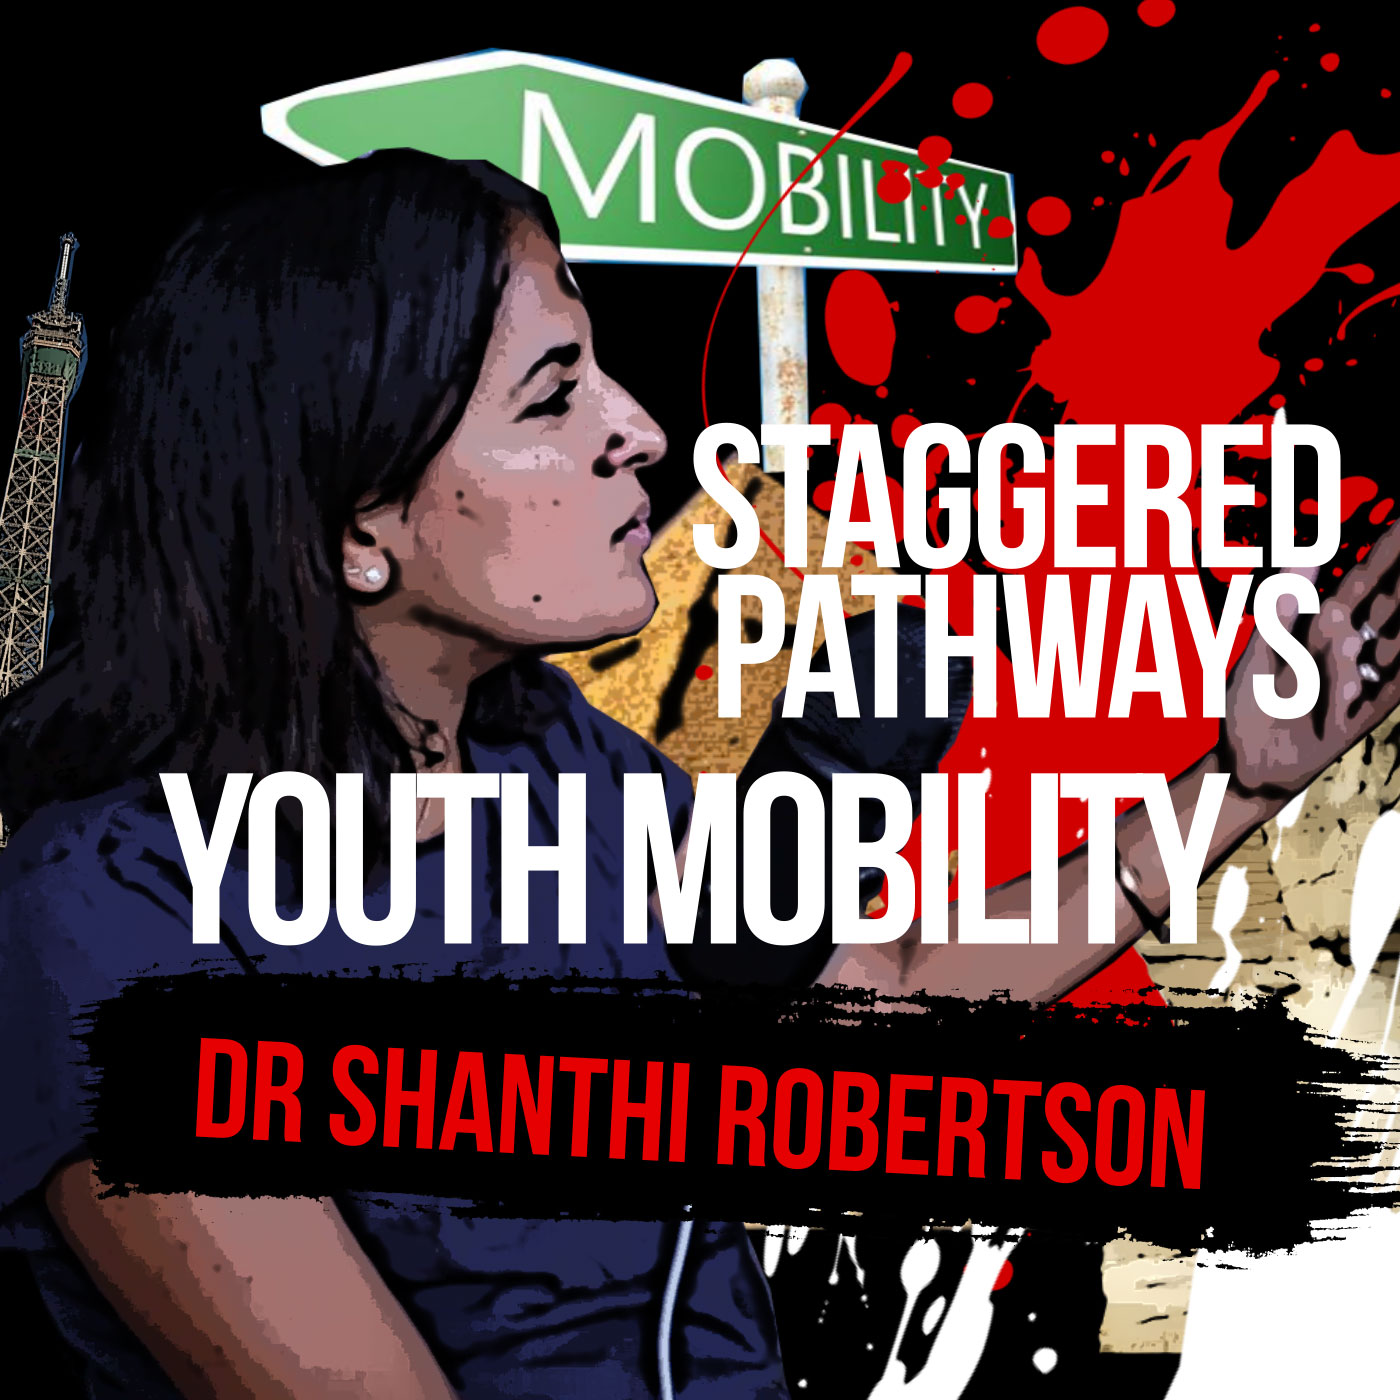 5.5 Staggered Pathways and Youth Mobilities | Shanthi Robertson